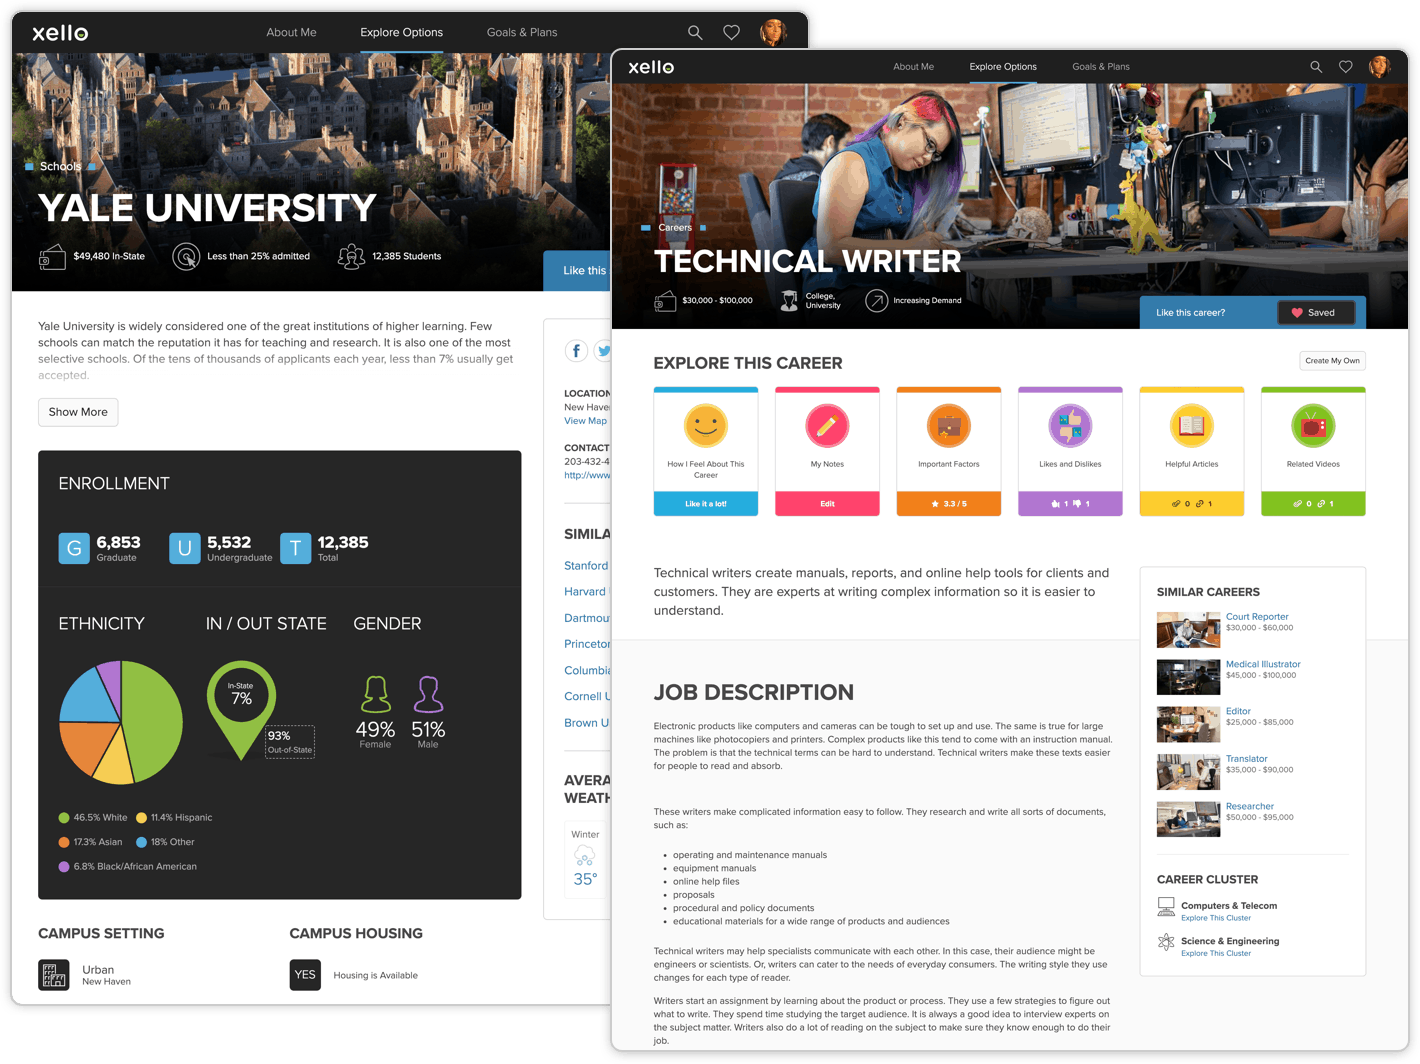 Rich, vibrant college and career profiles screens